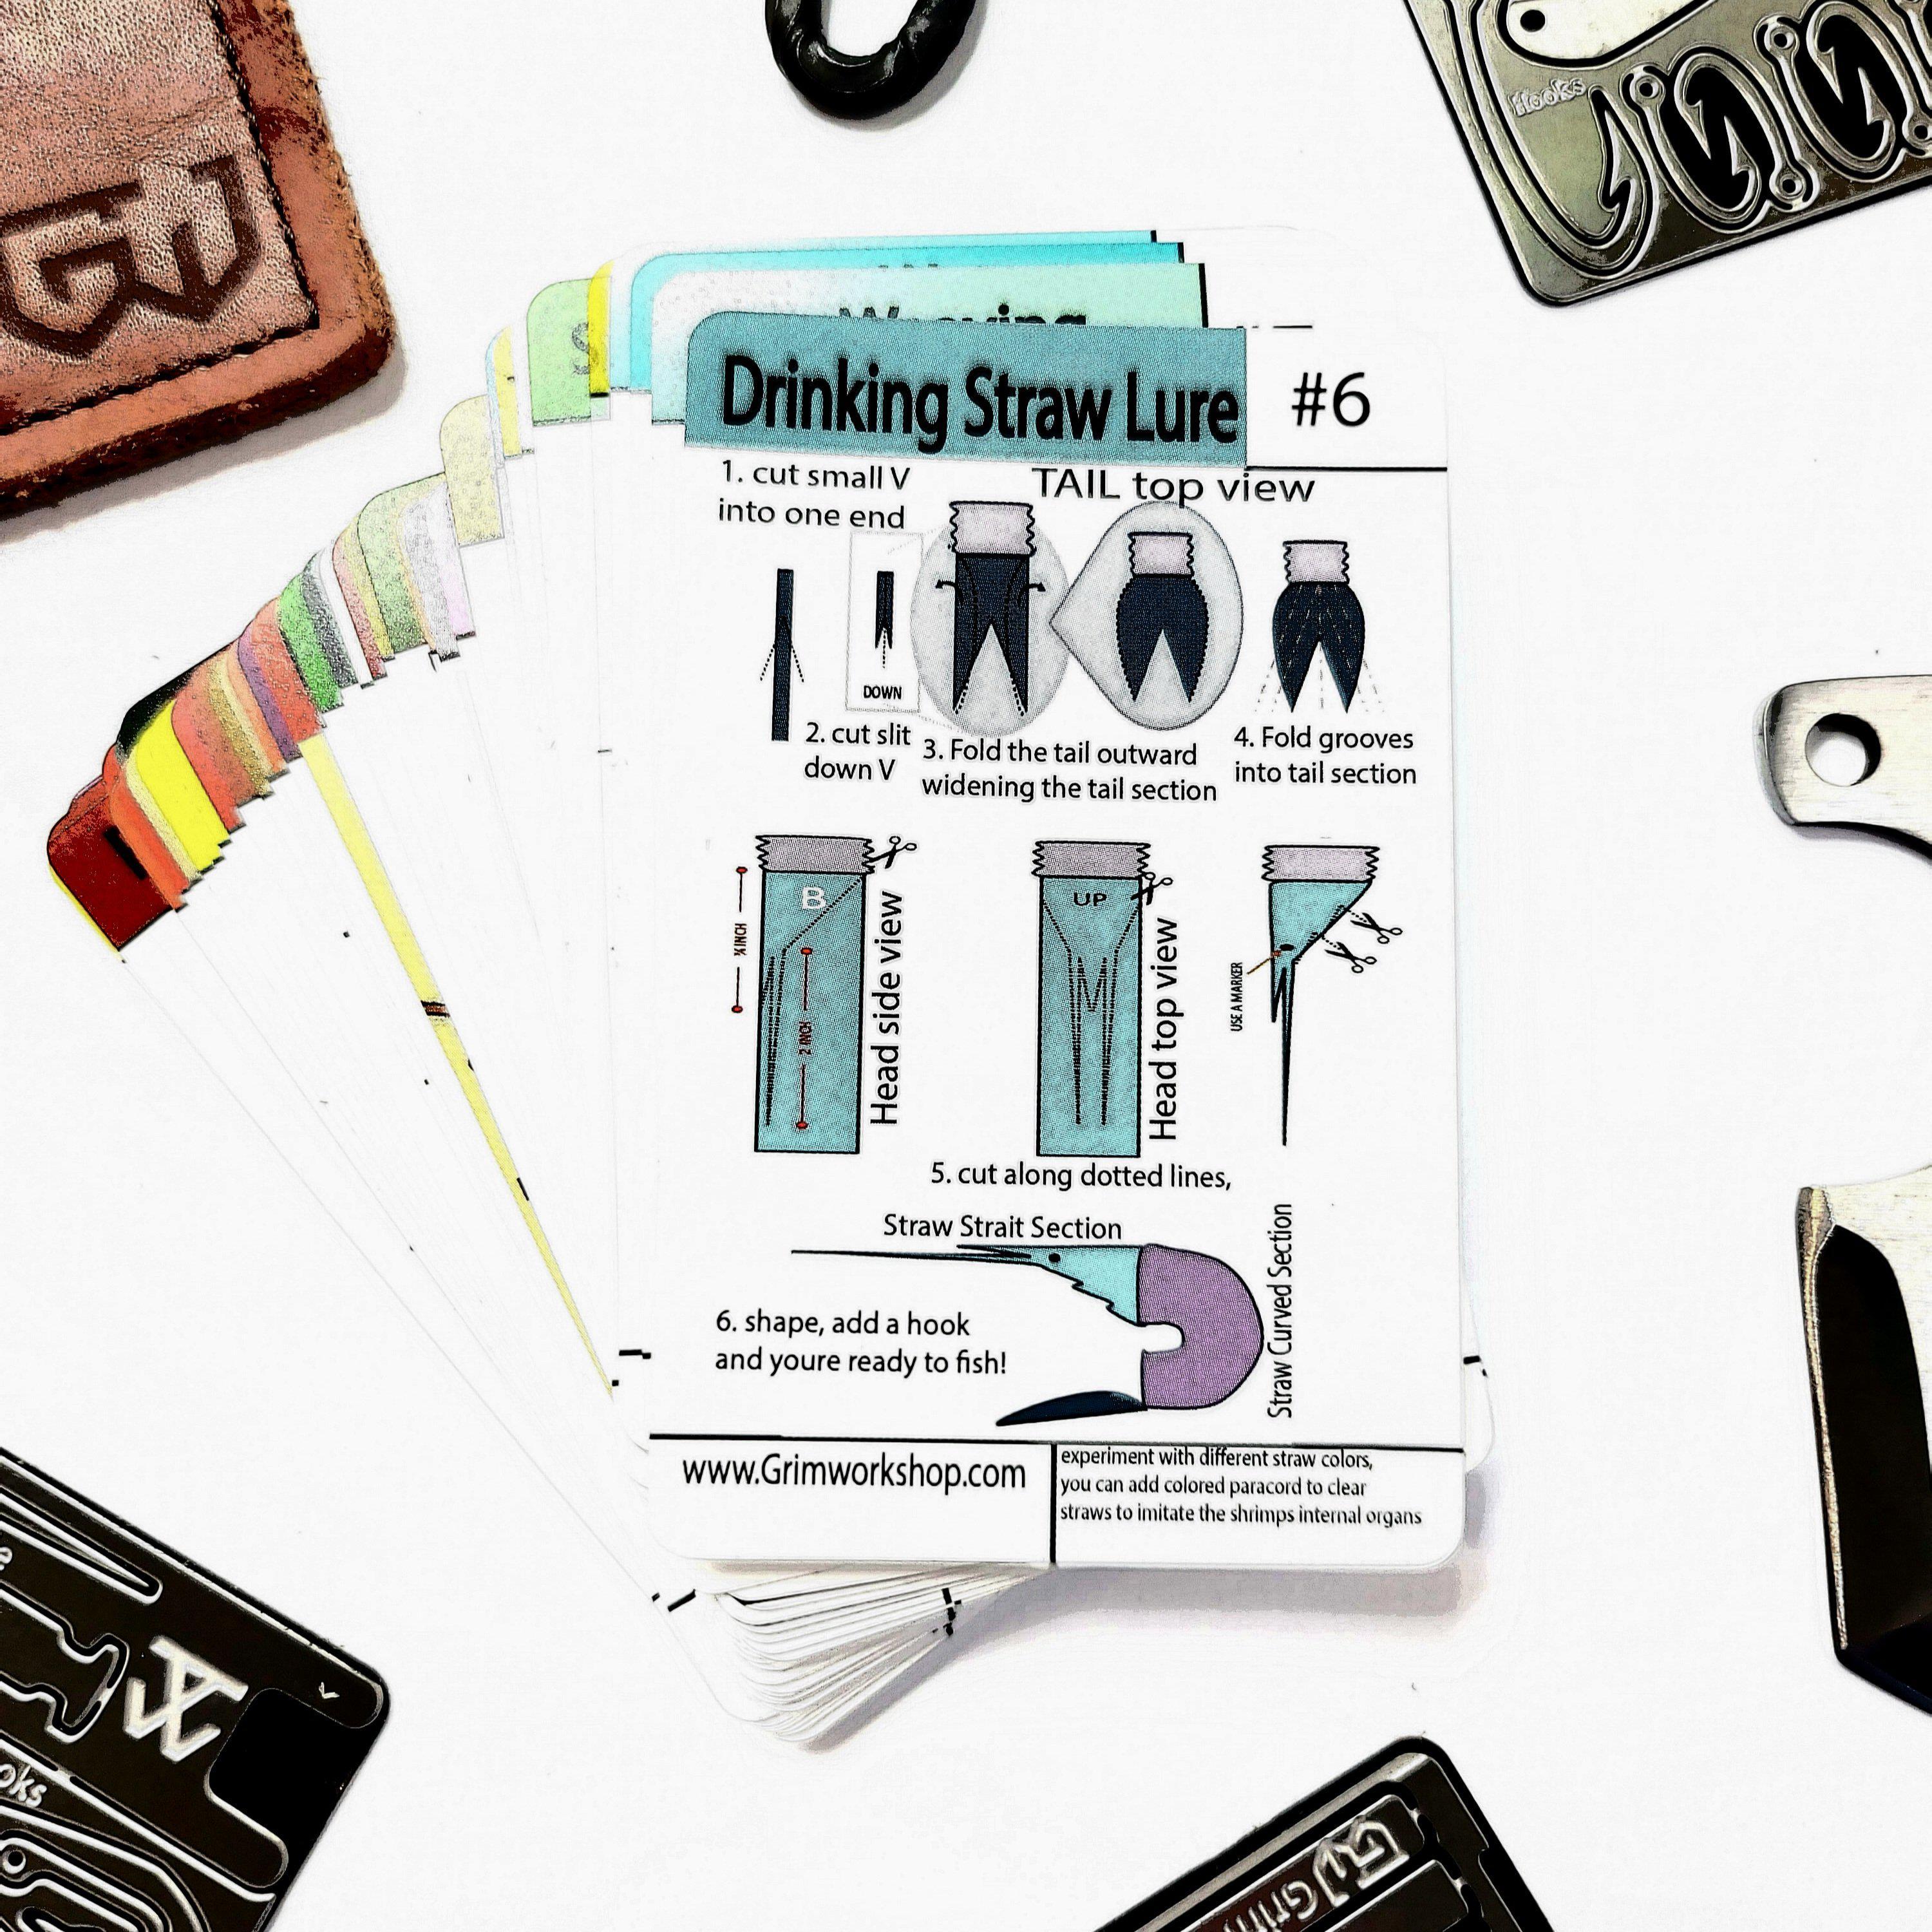 #6 Fishing (Drinking Straw Lure and Jug Line Fishing) Tip Card-Grimworkshop-bugoutbag-bushcraft-edc-gear-edctool-everydaycarry-survivalcard-survivalkit-wilderness-prepping-toolkit